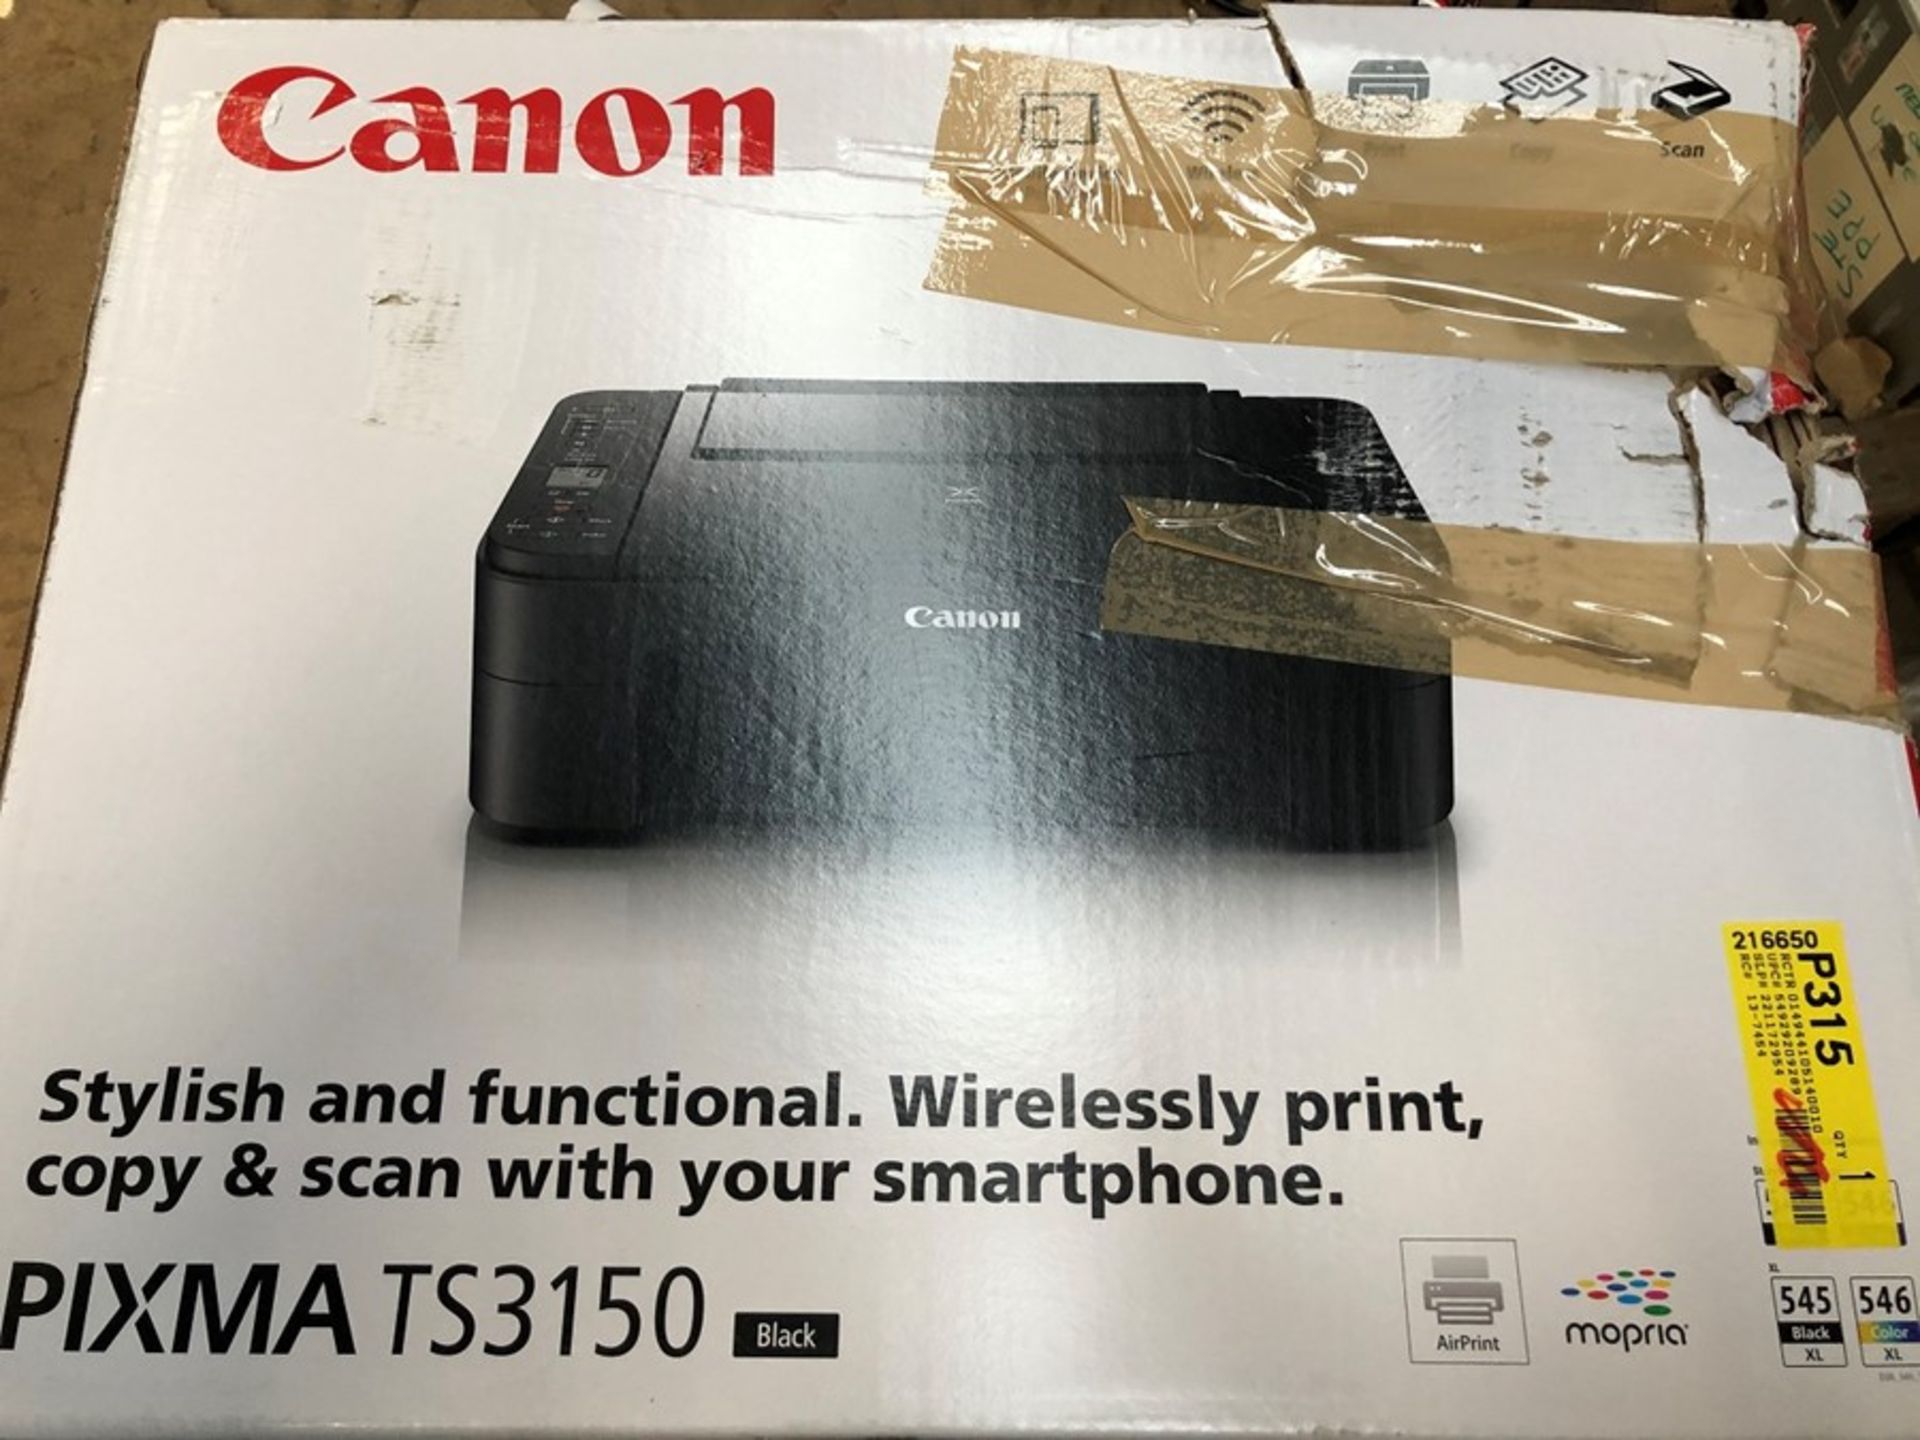 1 BOXED CANON PIXMA TS3150 PRINTER IN BLACK / RRP £29.99 - BL 665O (PUBLIC VIEWING AVAILABLE)